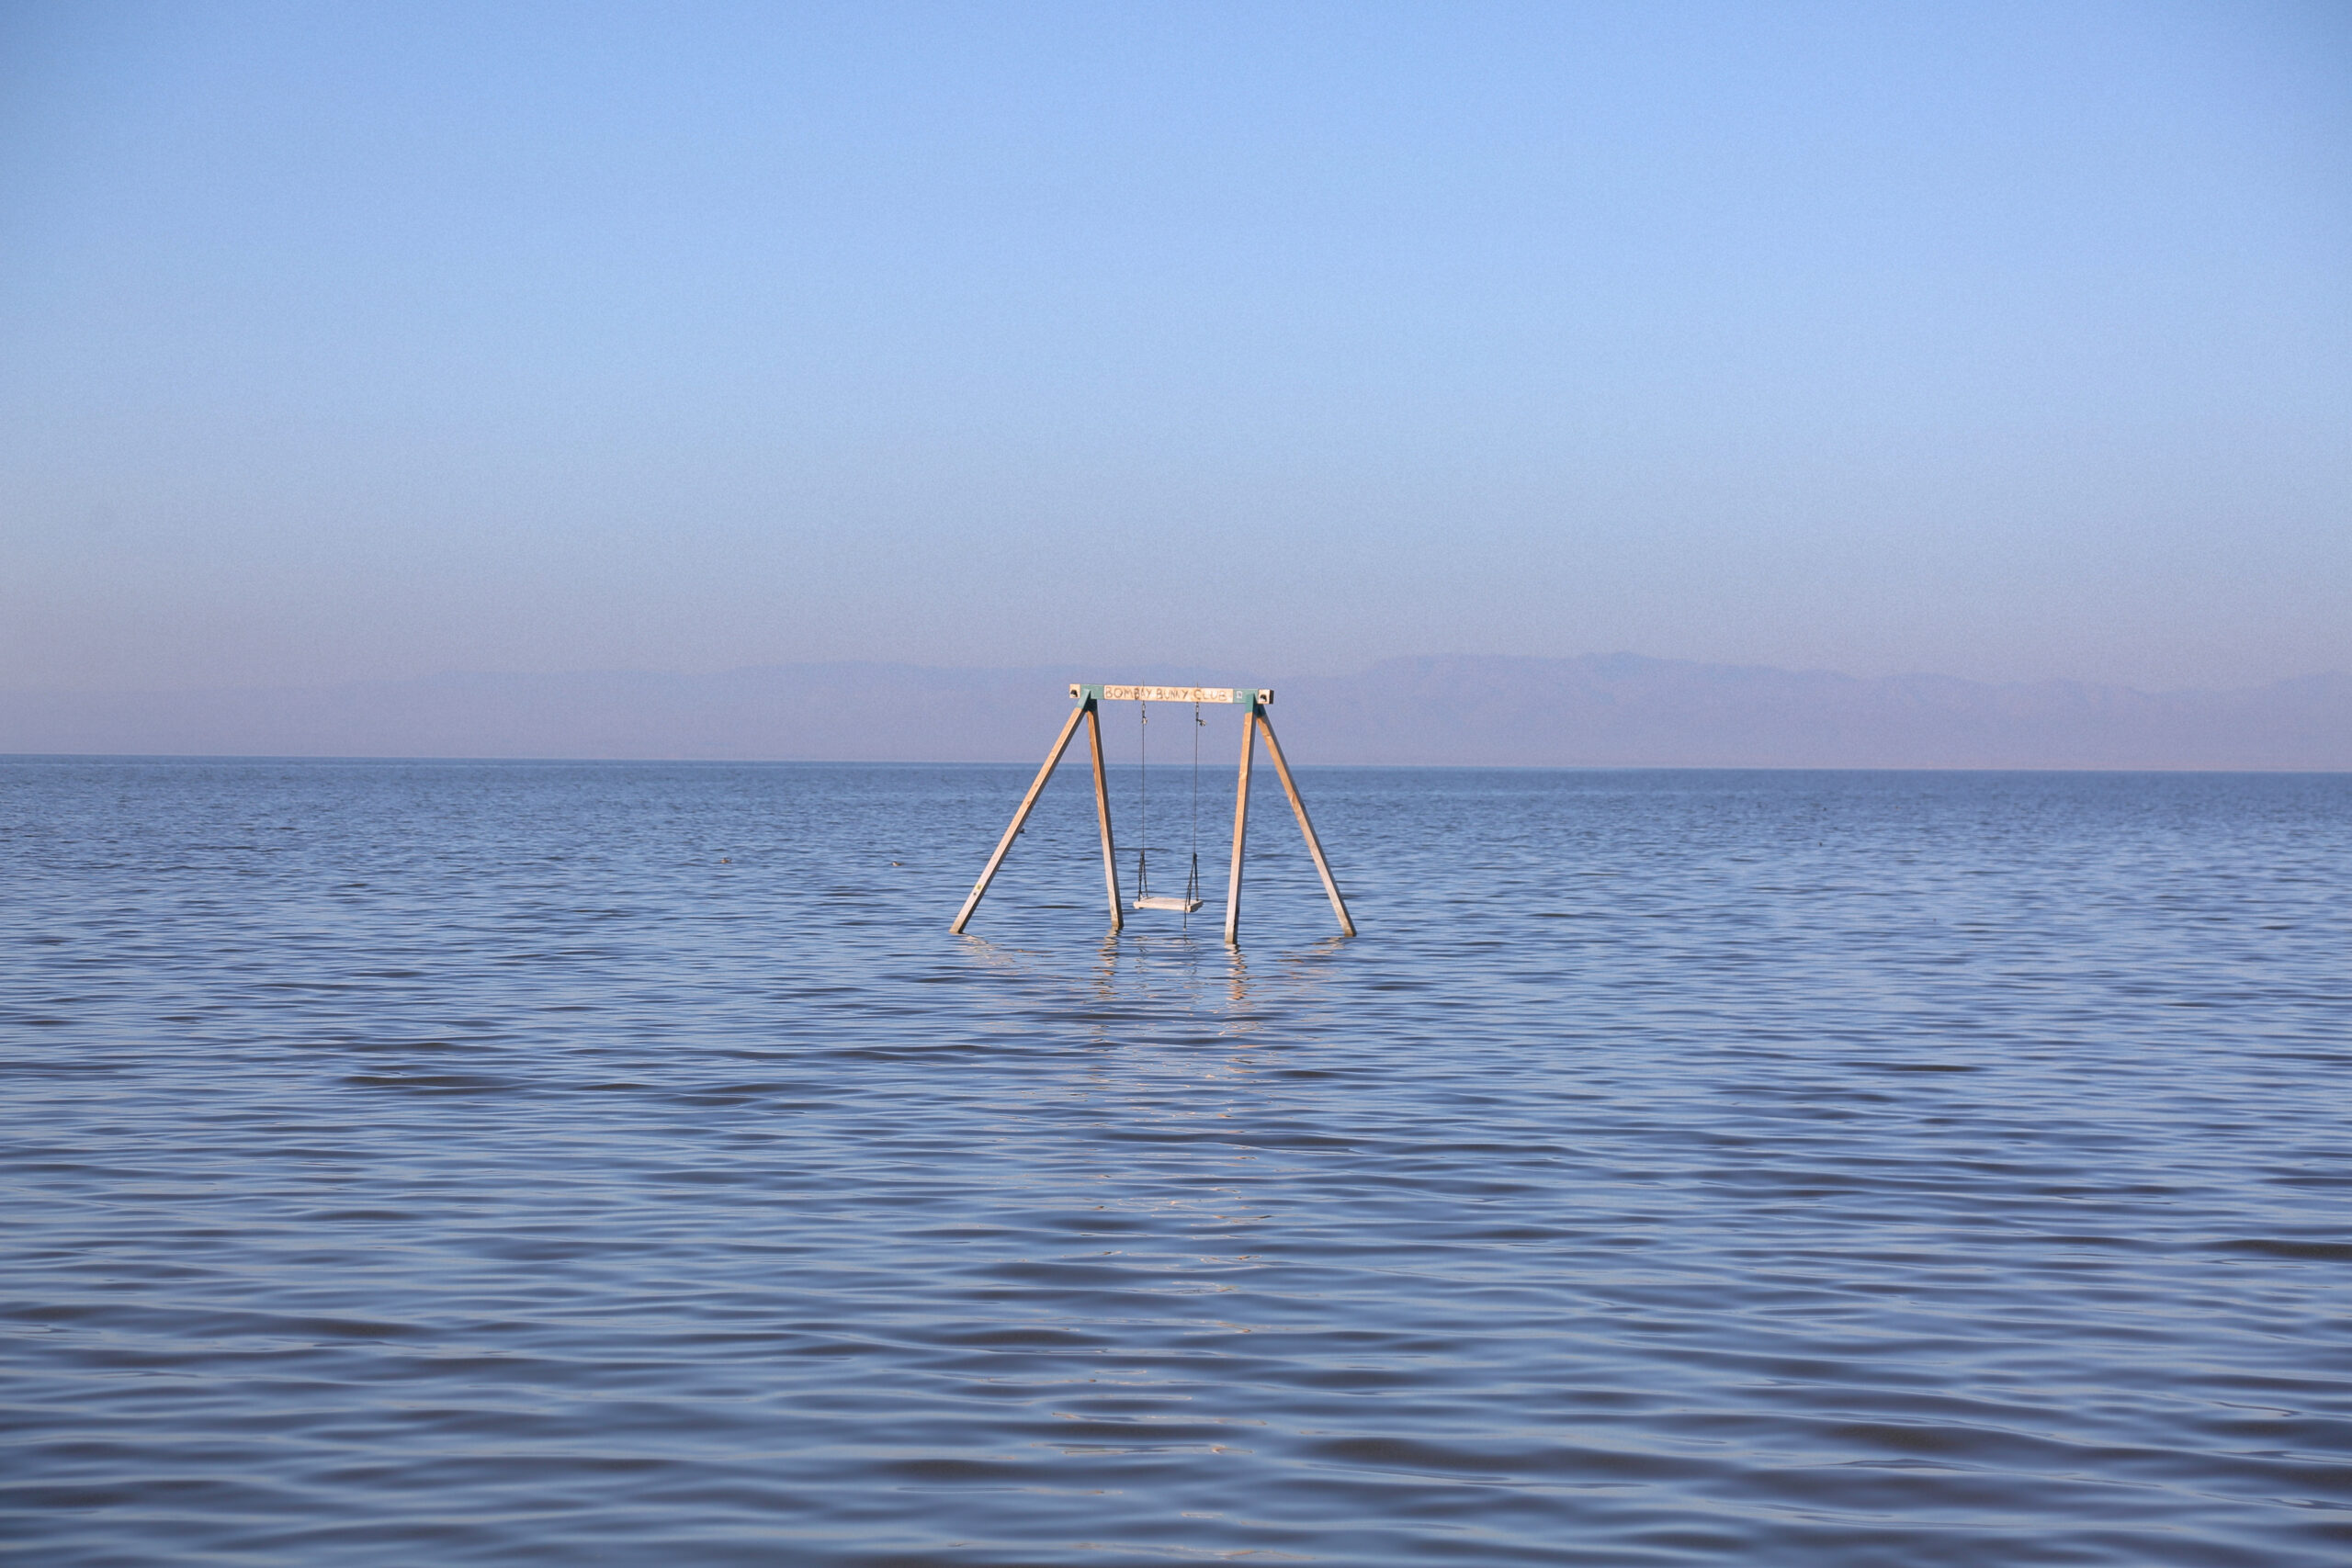 A swing set out in the water at Salton Sea in Southern California.